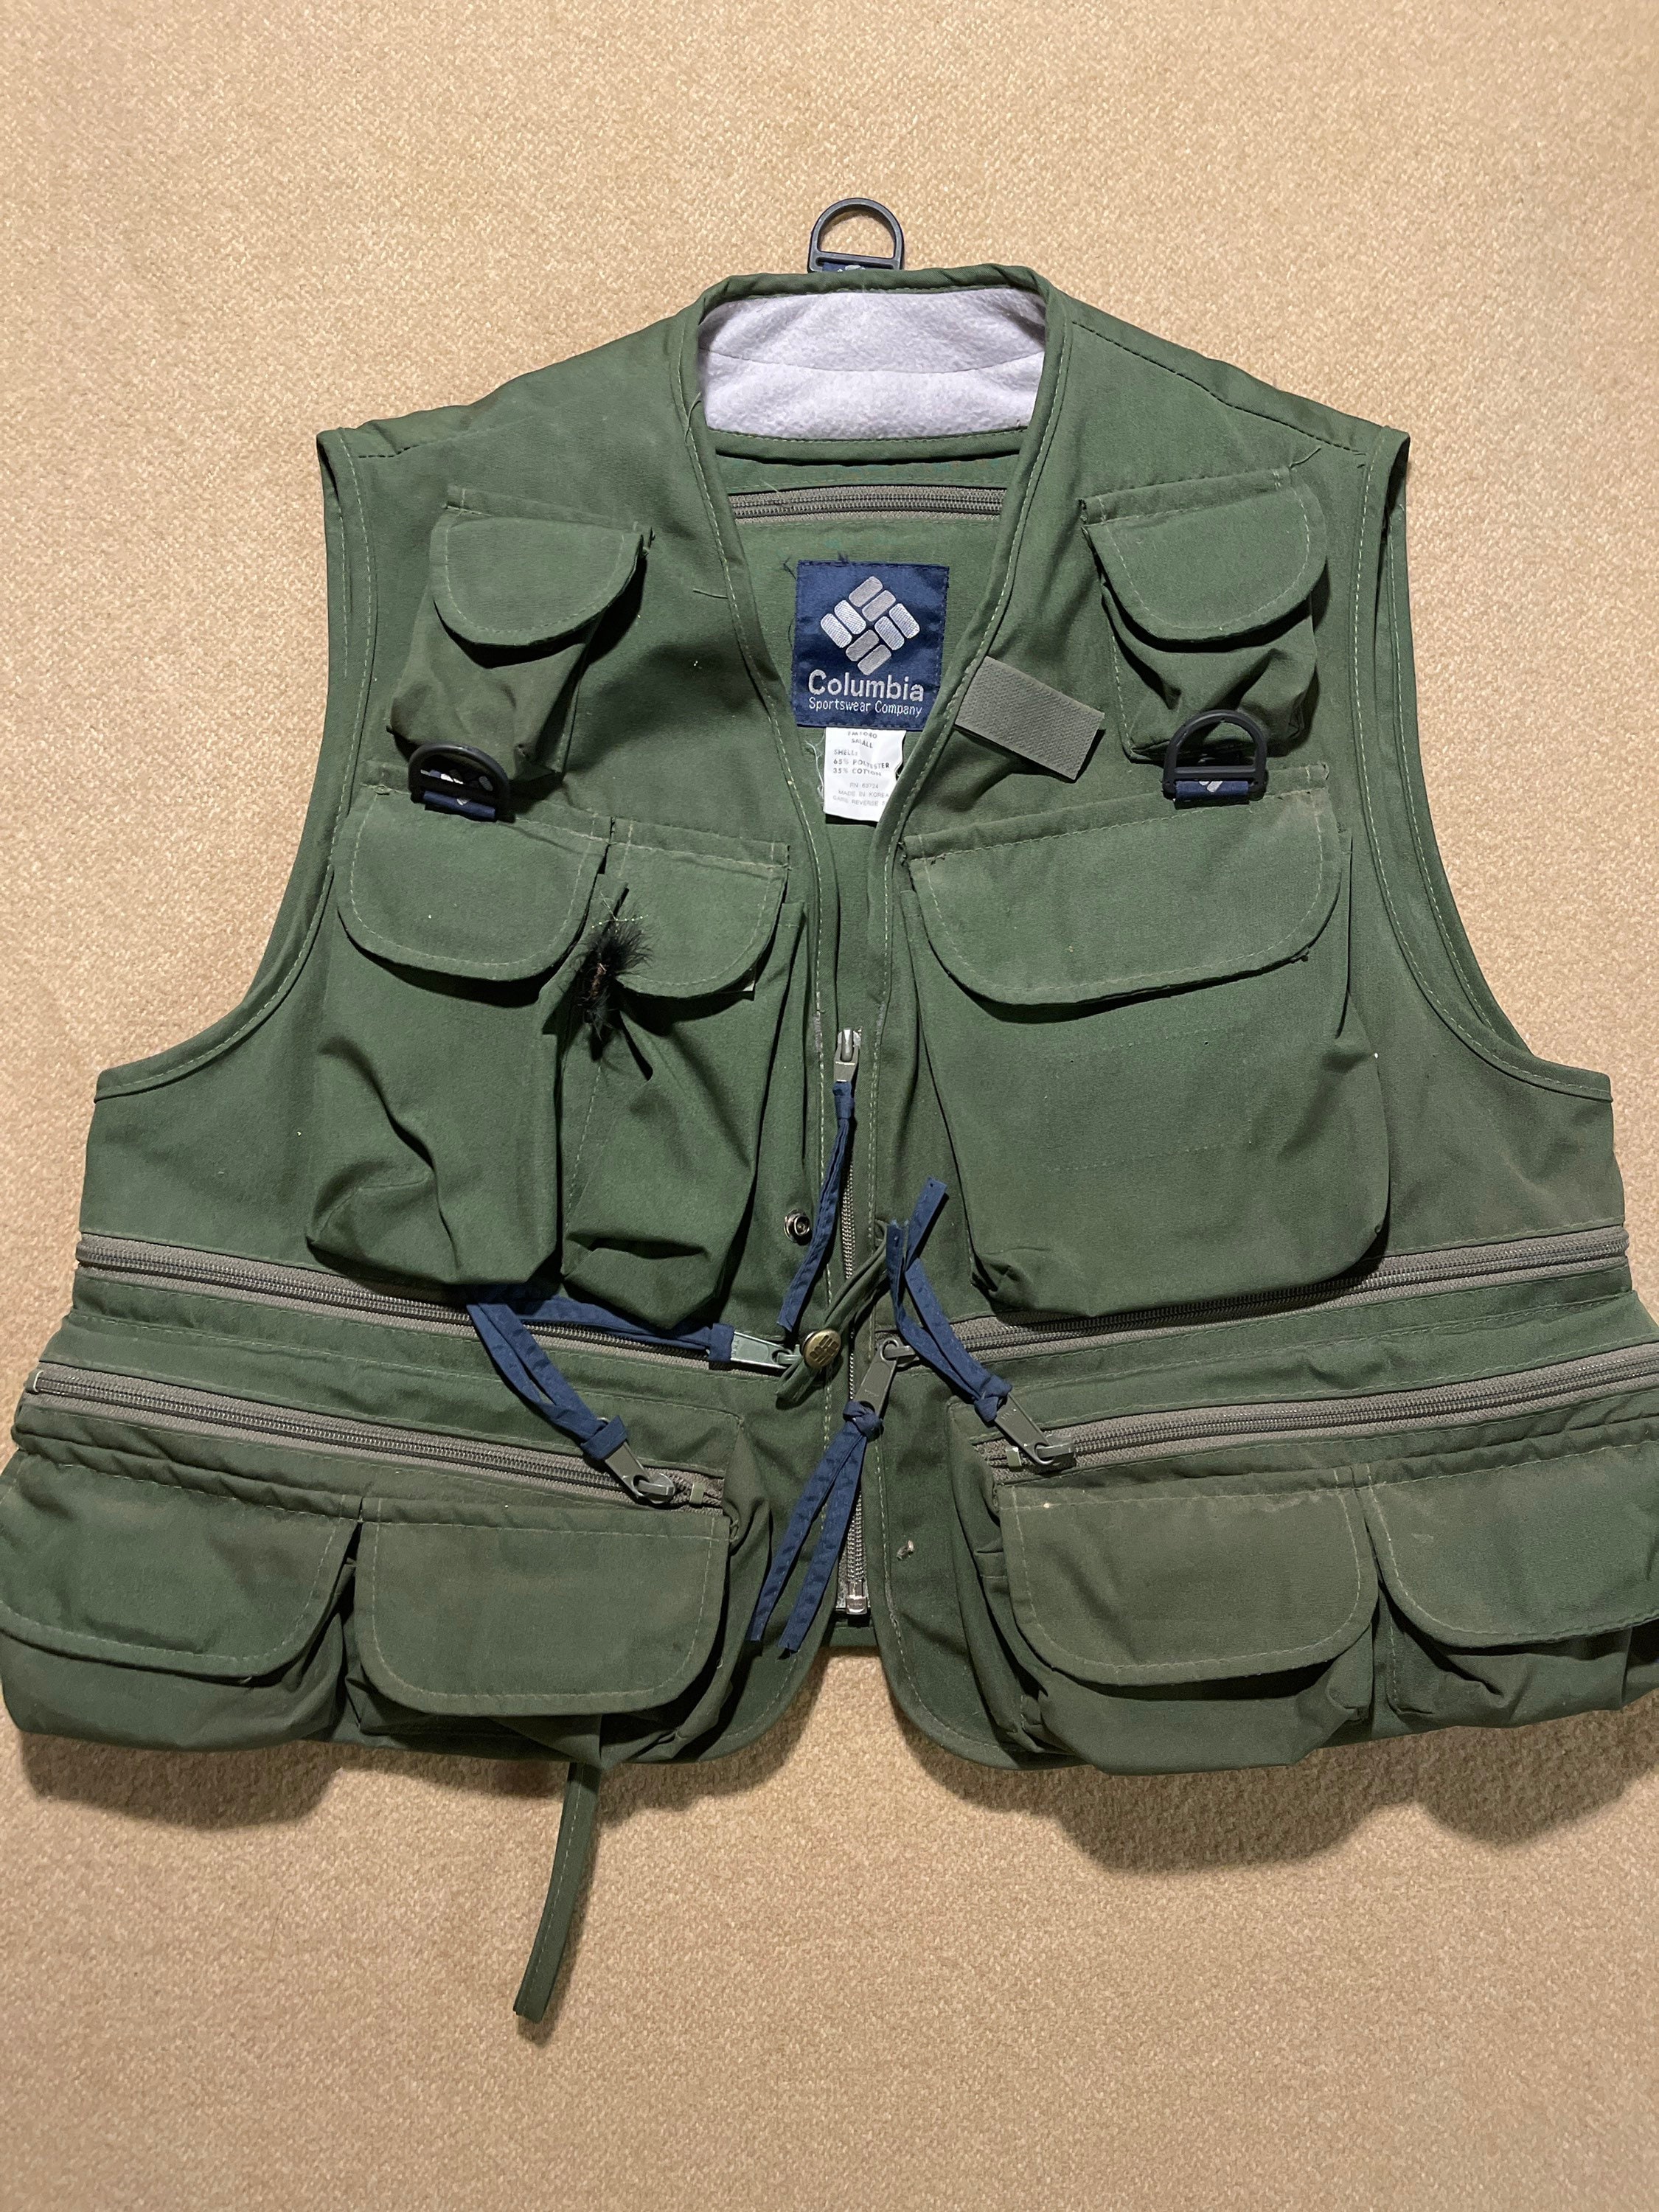 Vintage Columbia Sportswear Green Fly Fishing Vest Tackle Size